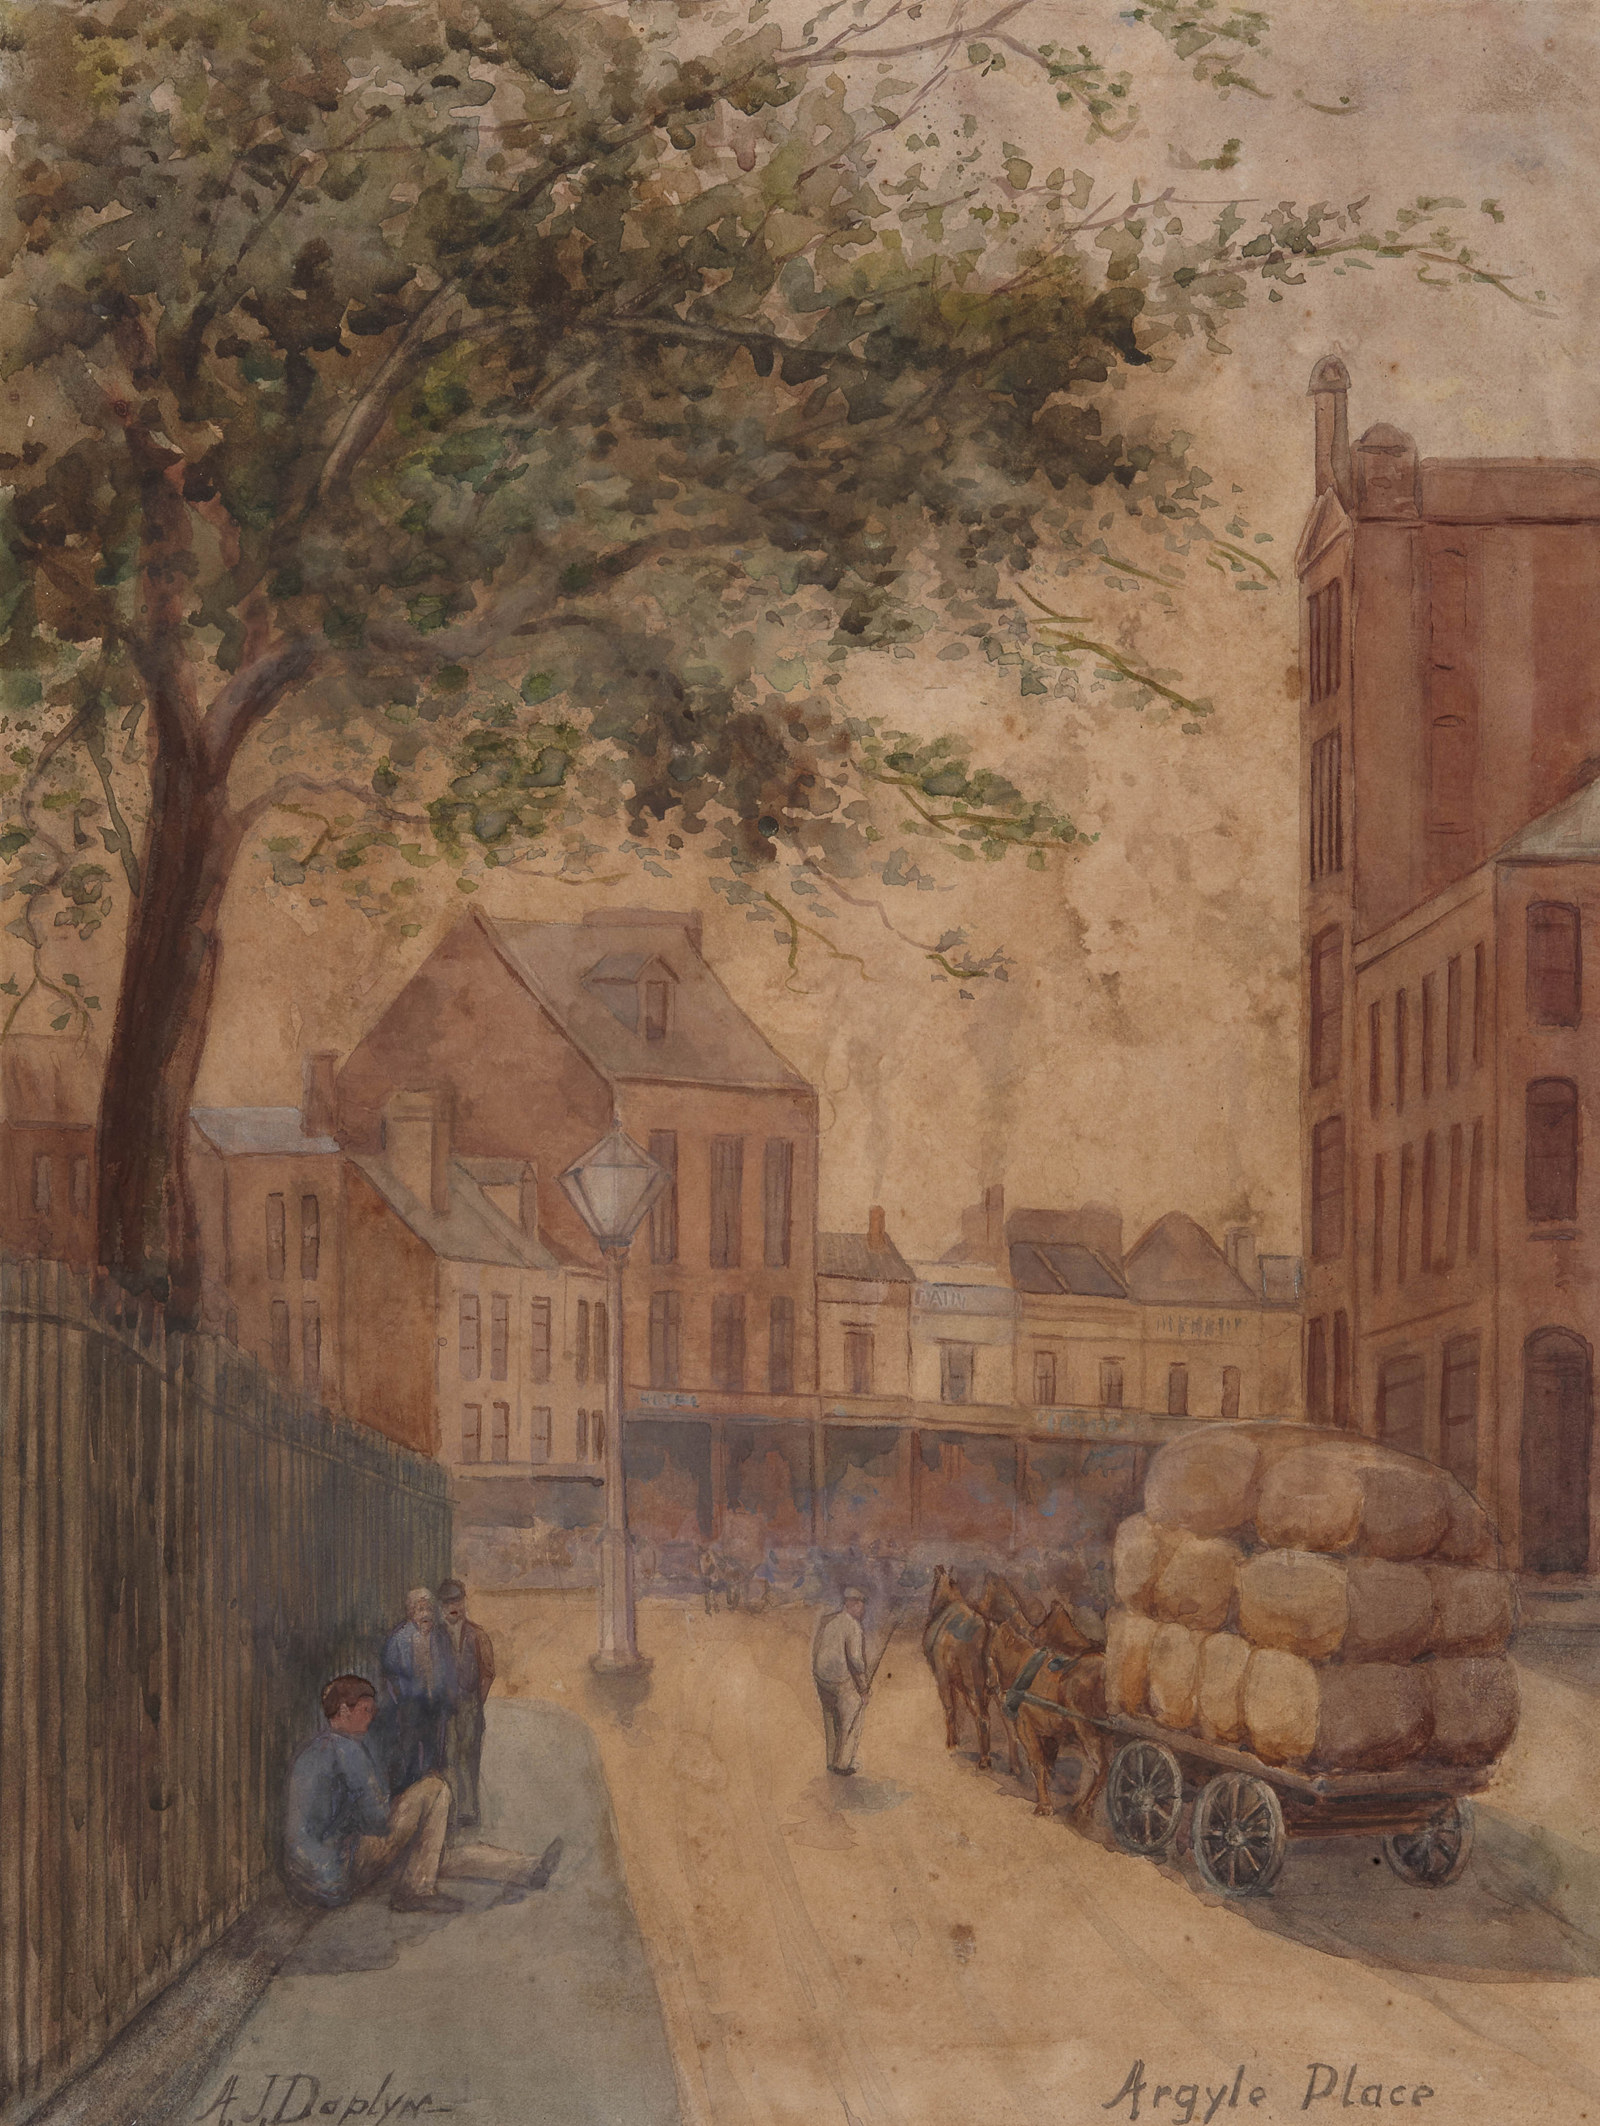 Painting showing a street with a wagon loaded with bails. In the foreground men sit up against a timber paling fence.